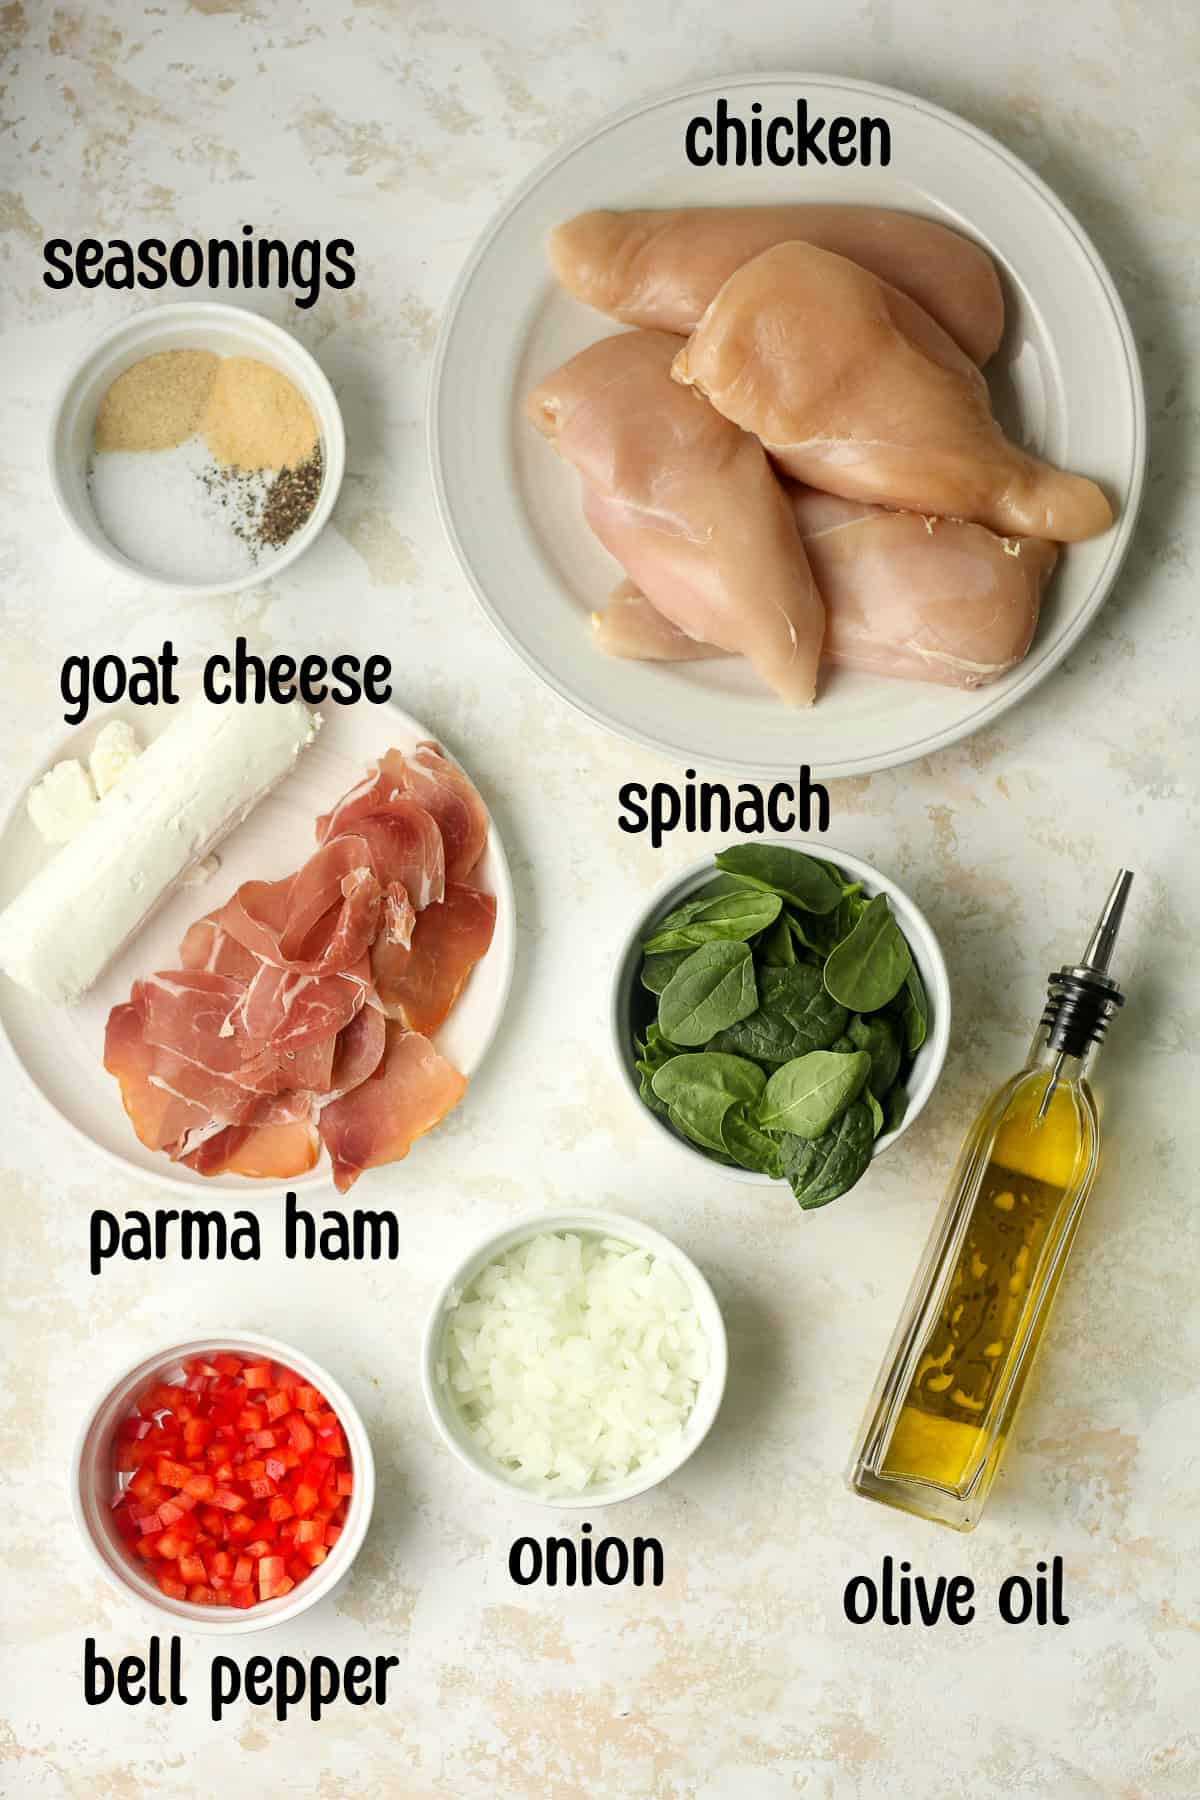 The ingredients for the parma ham wrapped chicken.